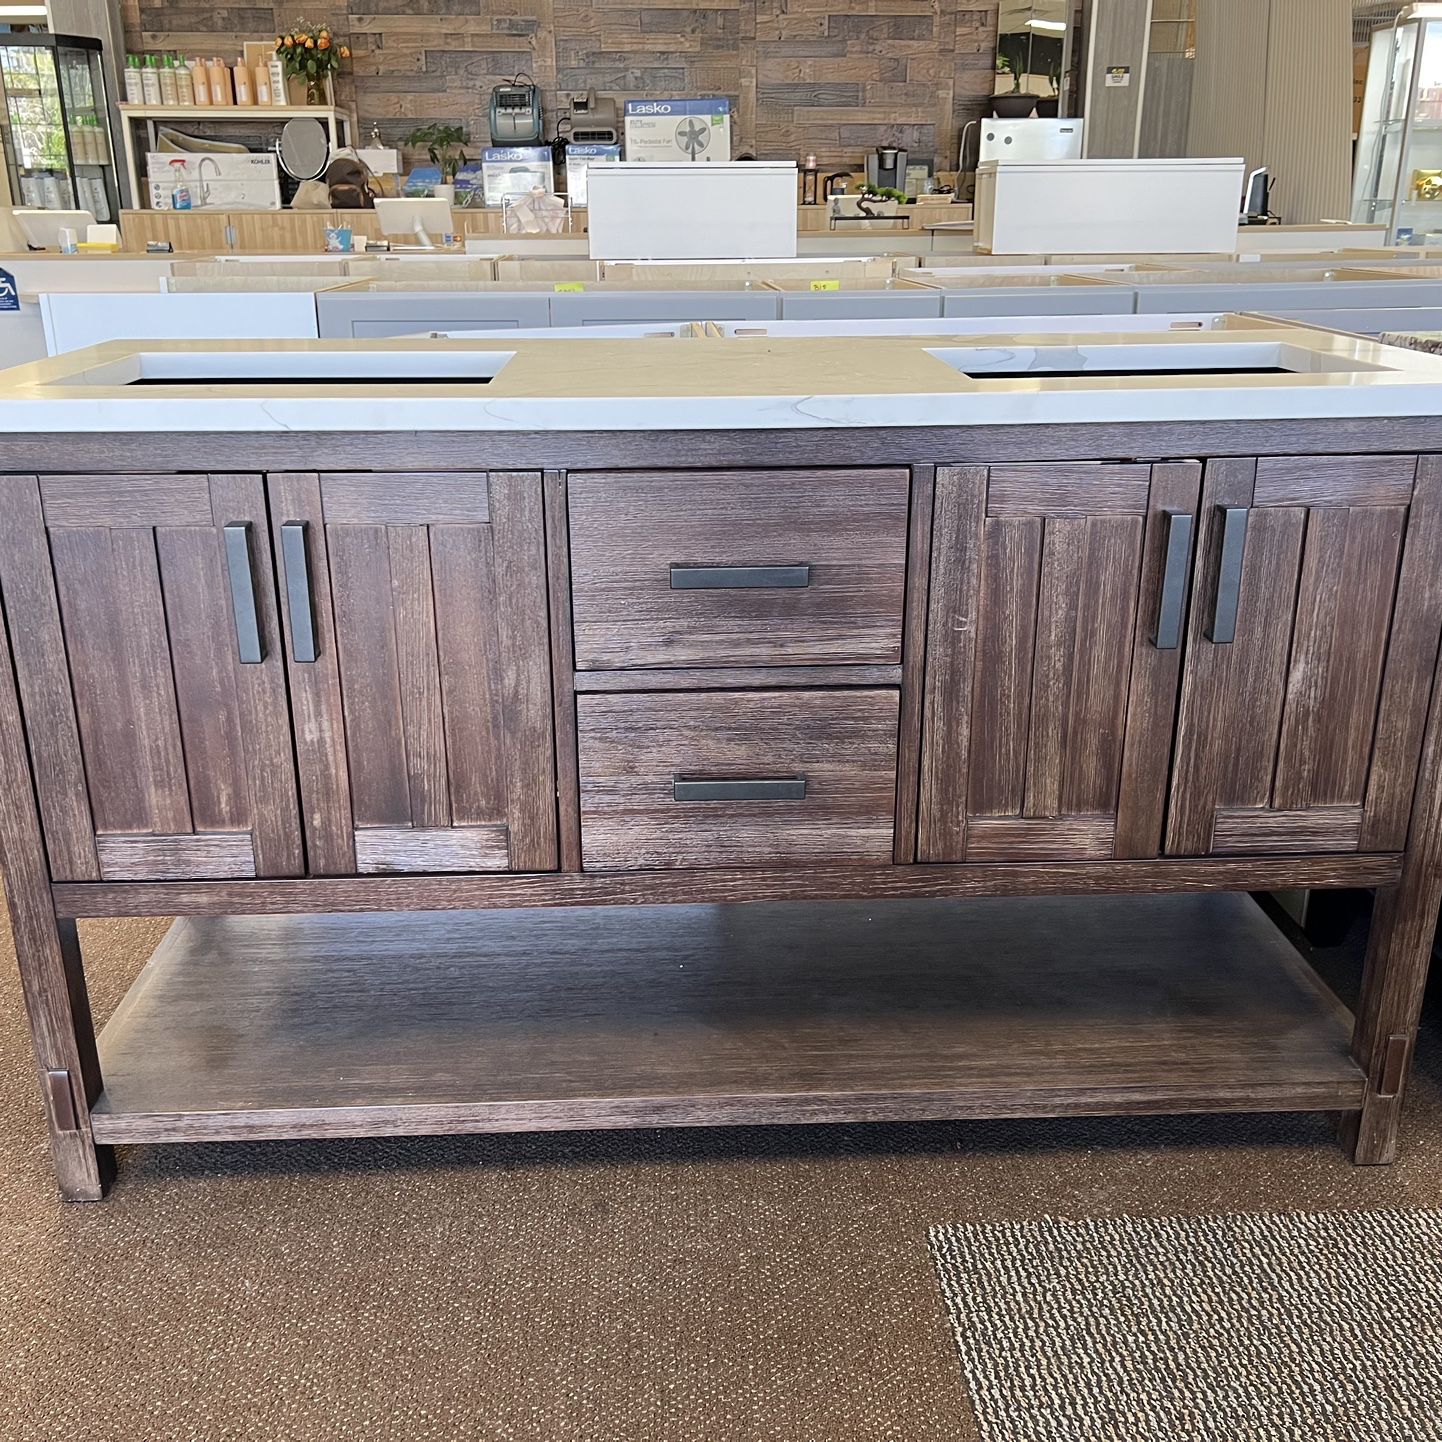 WOOD CUSTOM COMPLETE KITCHENS AND BATHROOM VANITIES * CABINETS STARTING $100 AND UP